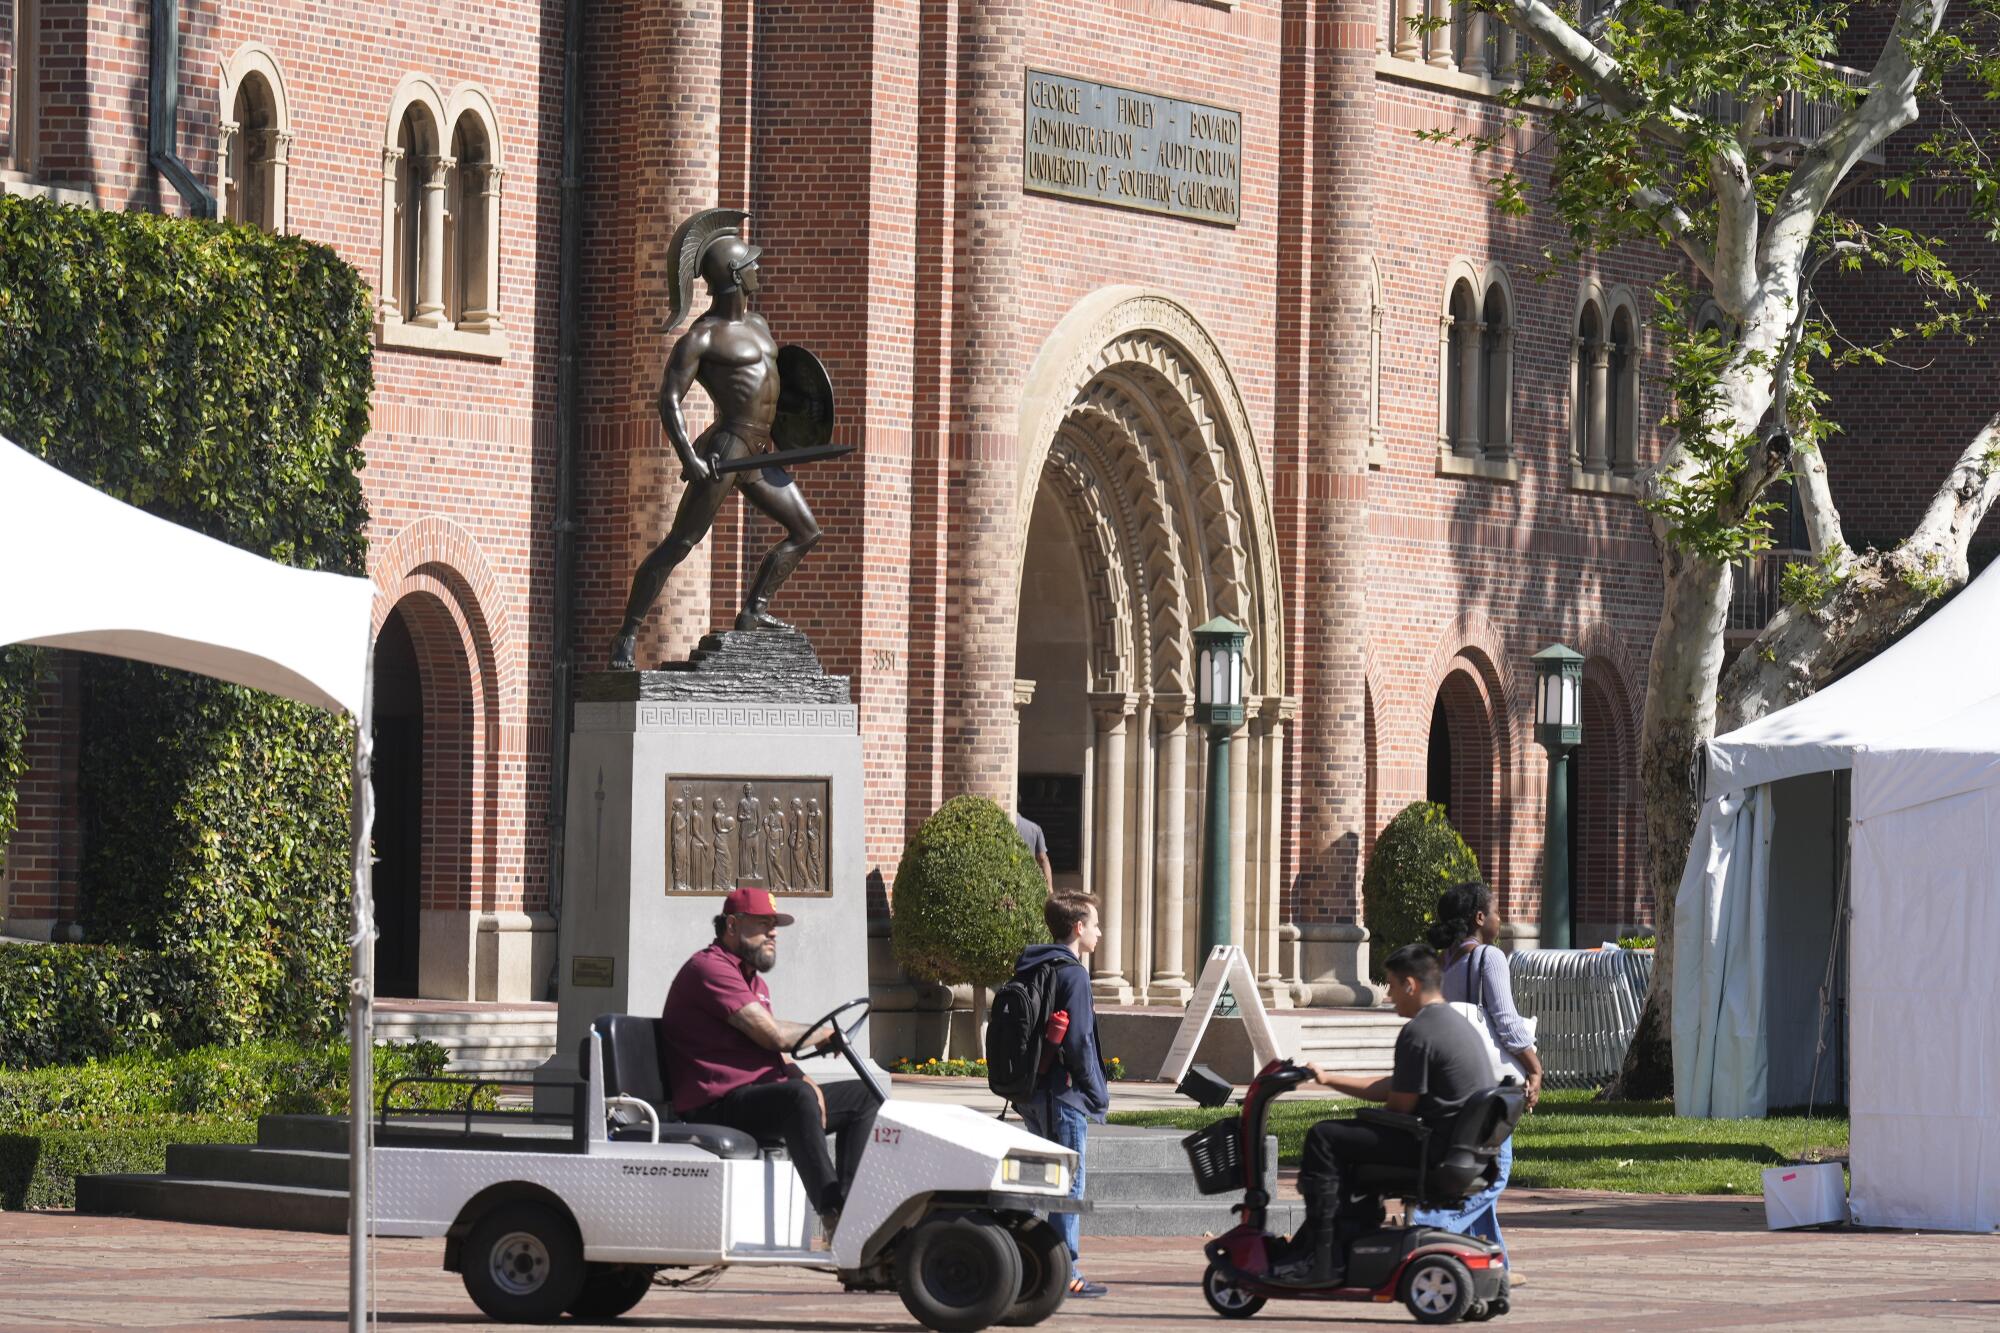 People in vehicles pass the Tommy Trojan statue.